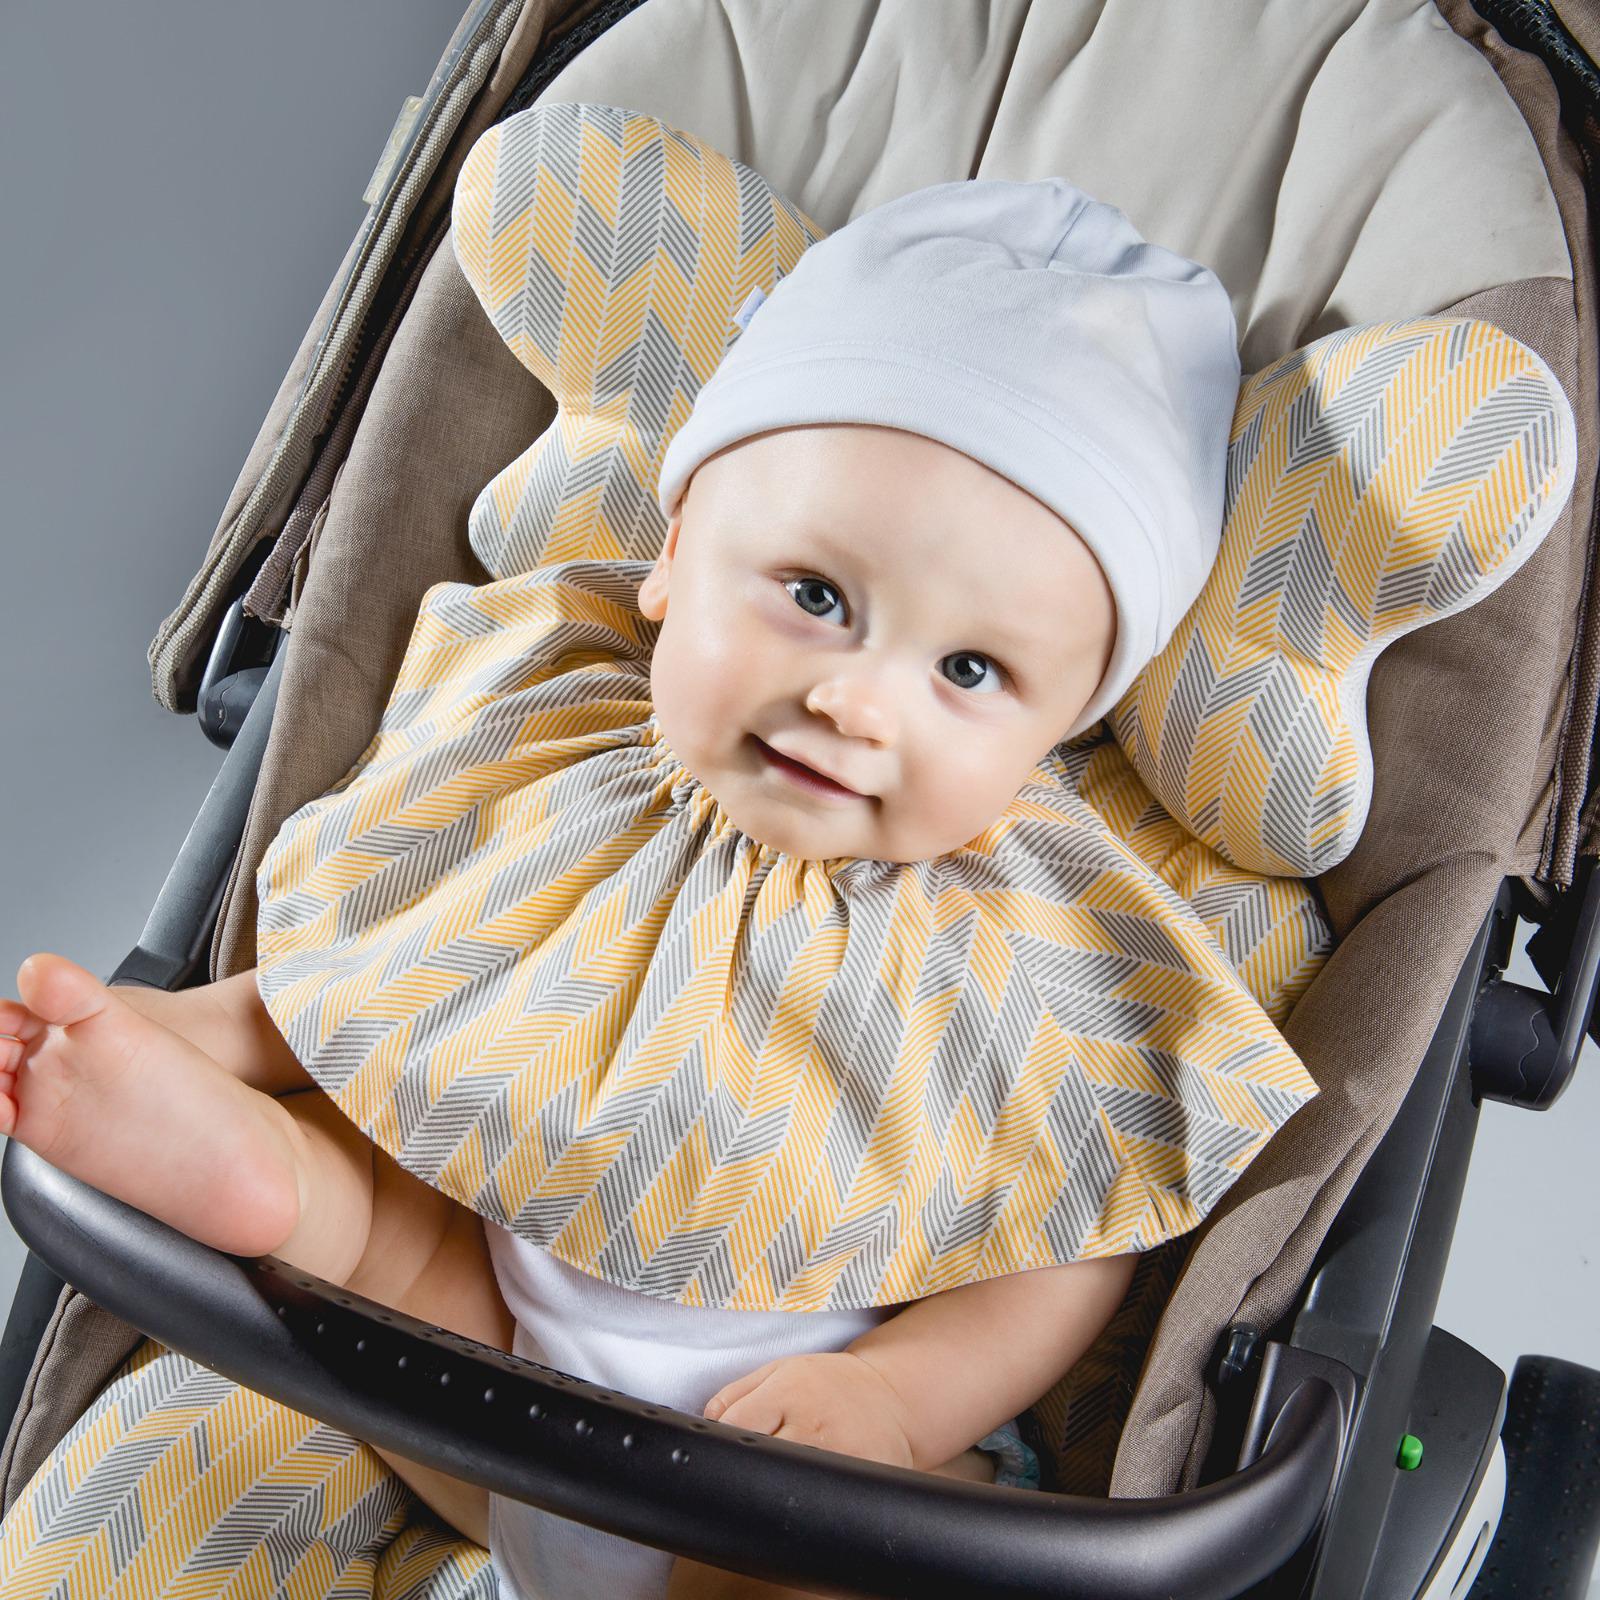 Organic Cotton vs Conventional Cotton: Why Organic Cotton is Best for Your Baby